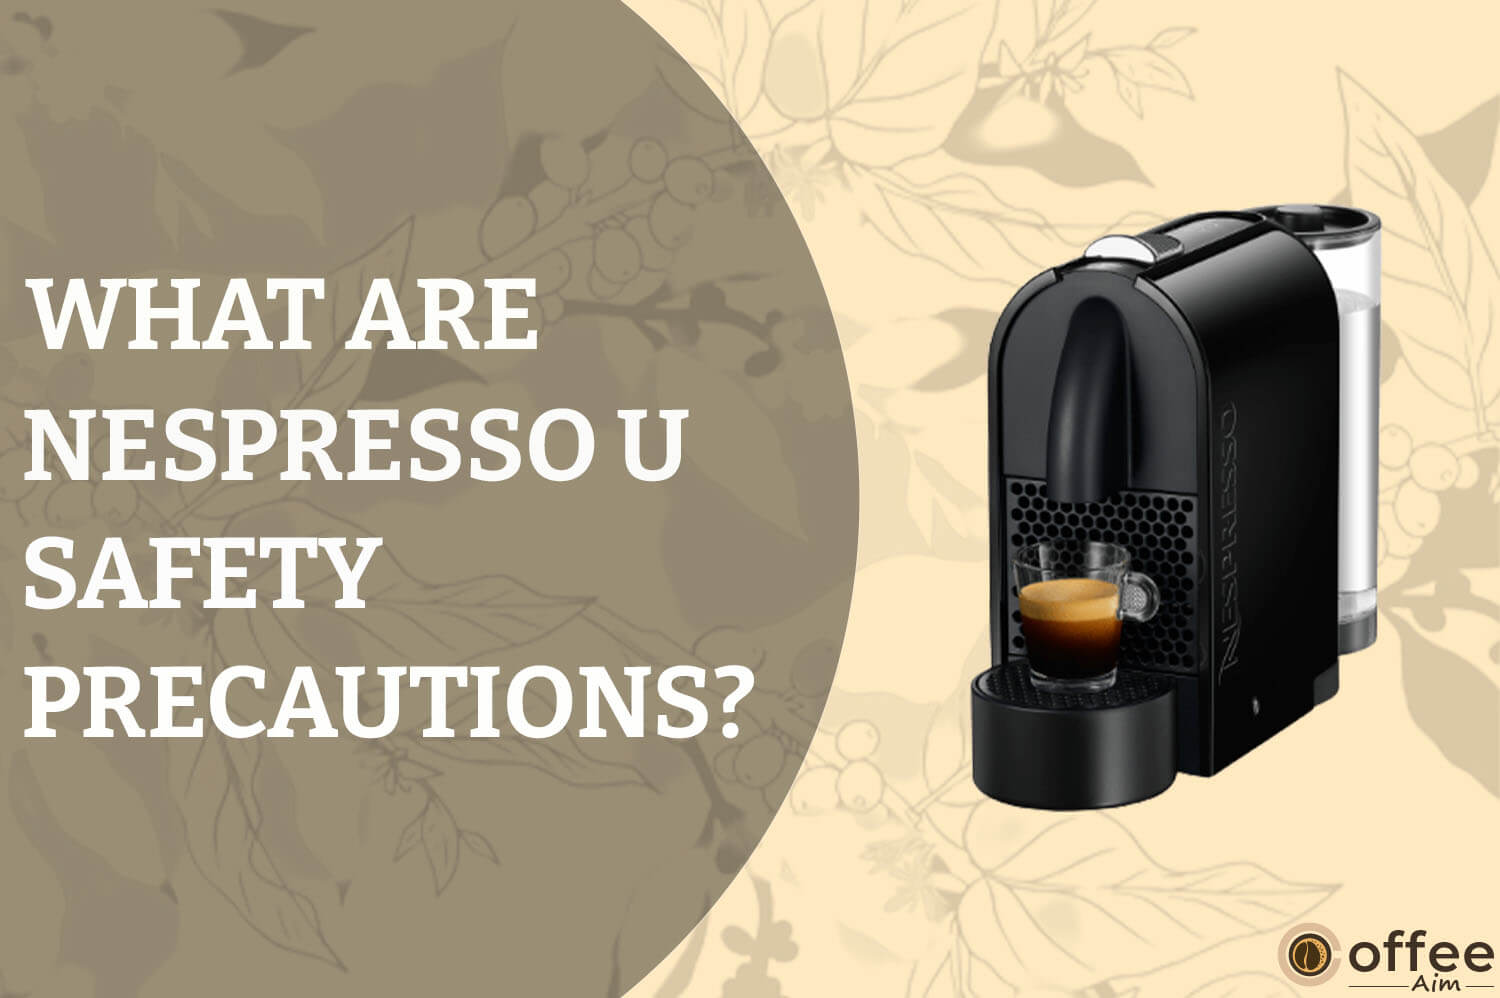 Featured image for the article "What are Nespresso U Safety Precautions"